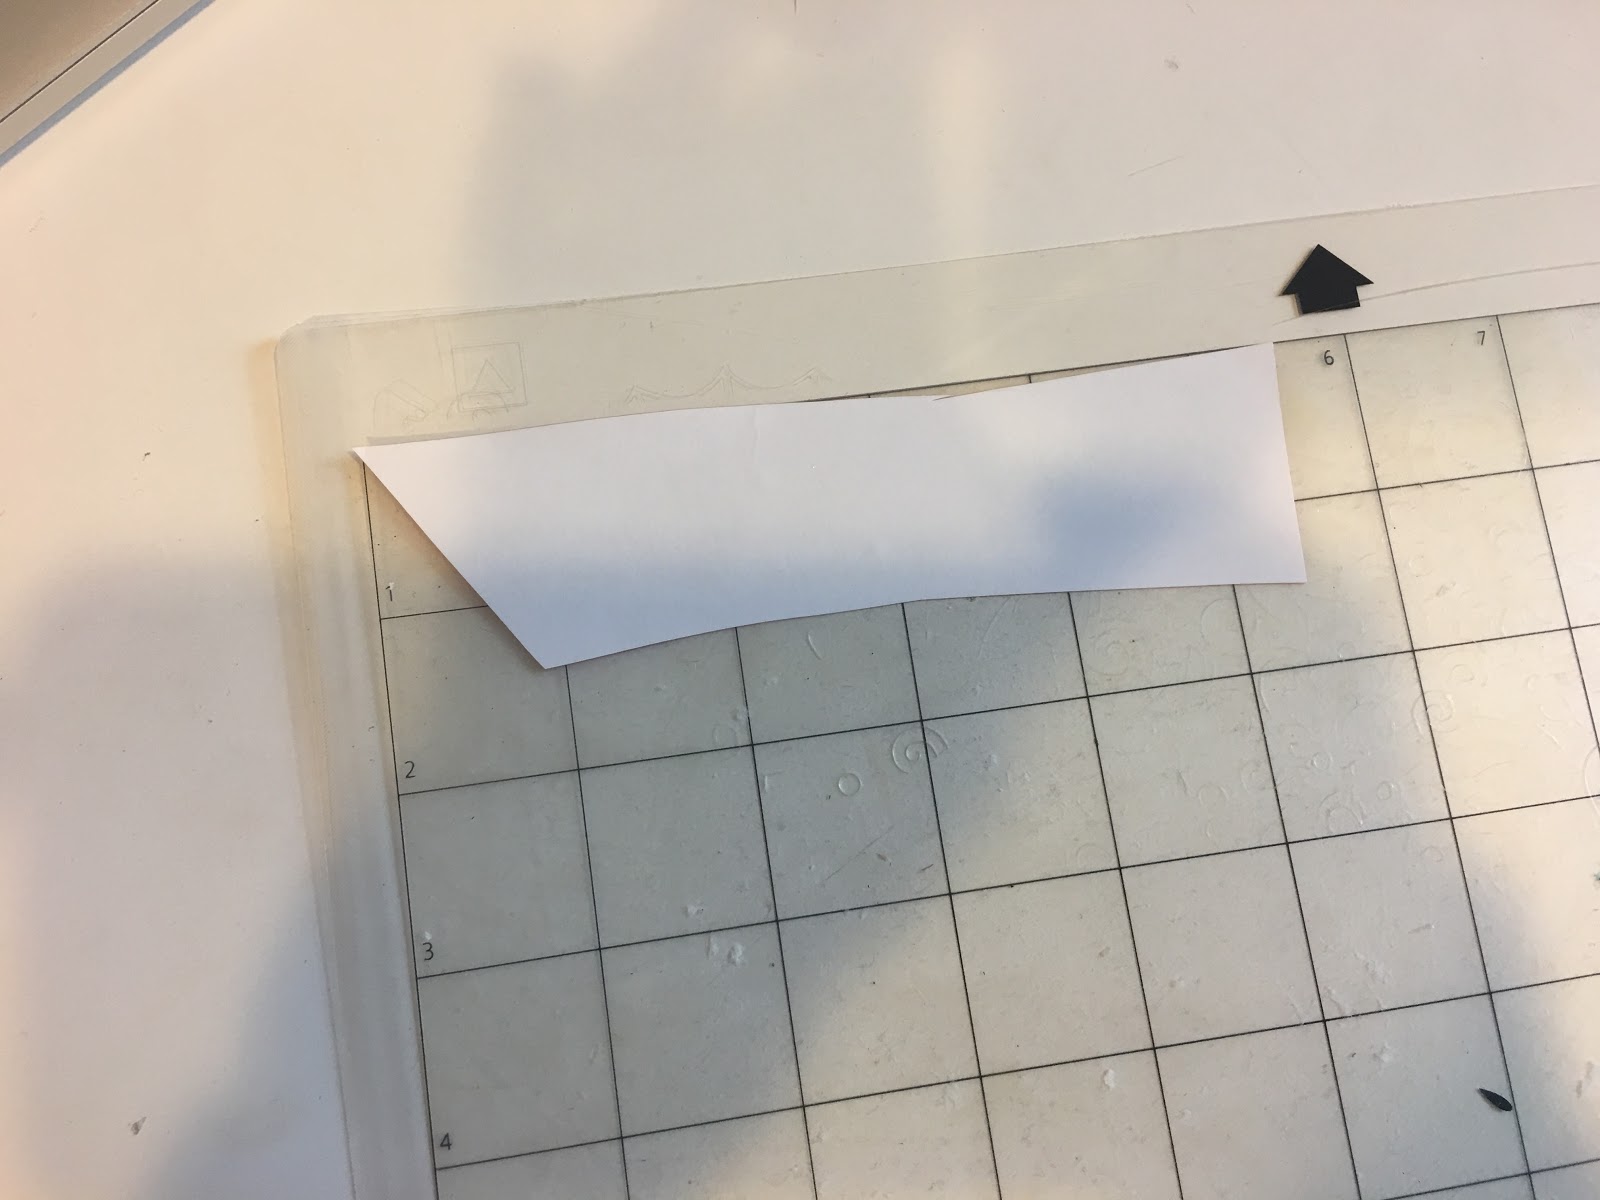 Cutting and Transferring HTV With No Transfer Sheet (Silhouette Tutorial) -  Silhouette School